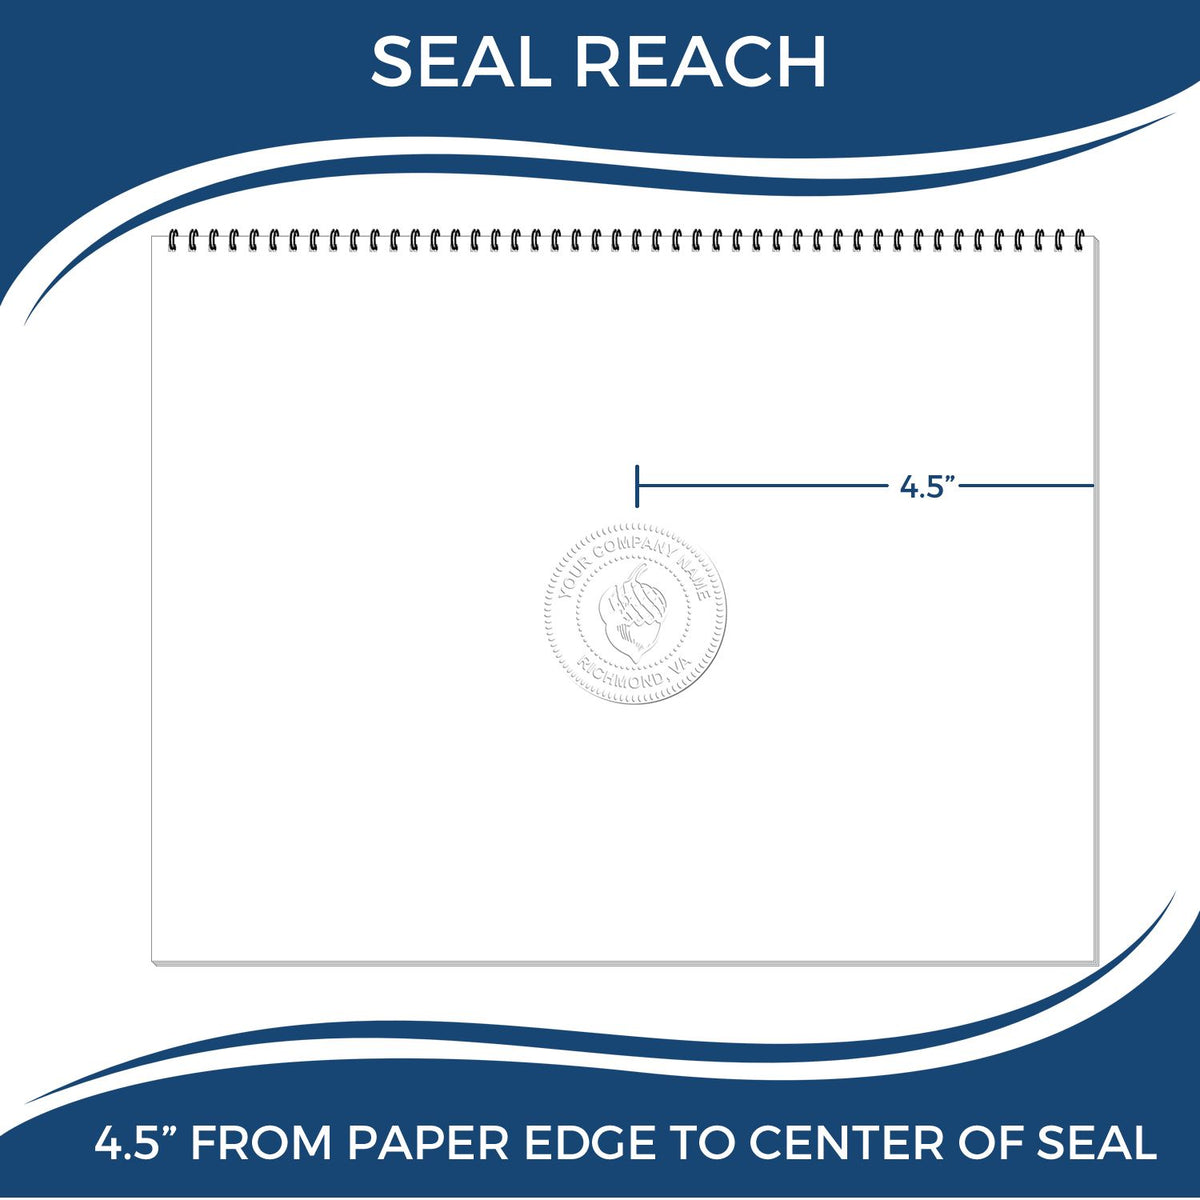 An infographic showing the seal reach which is represented by a ruler and a miniature seal image of the State of Nevada Extended Long Reach Geologist Seal